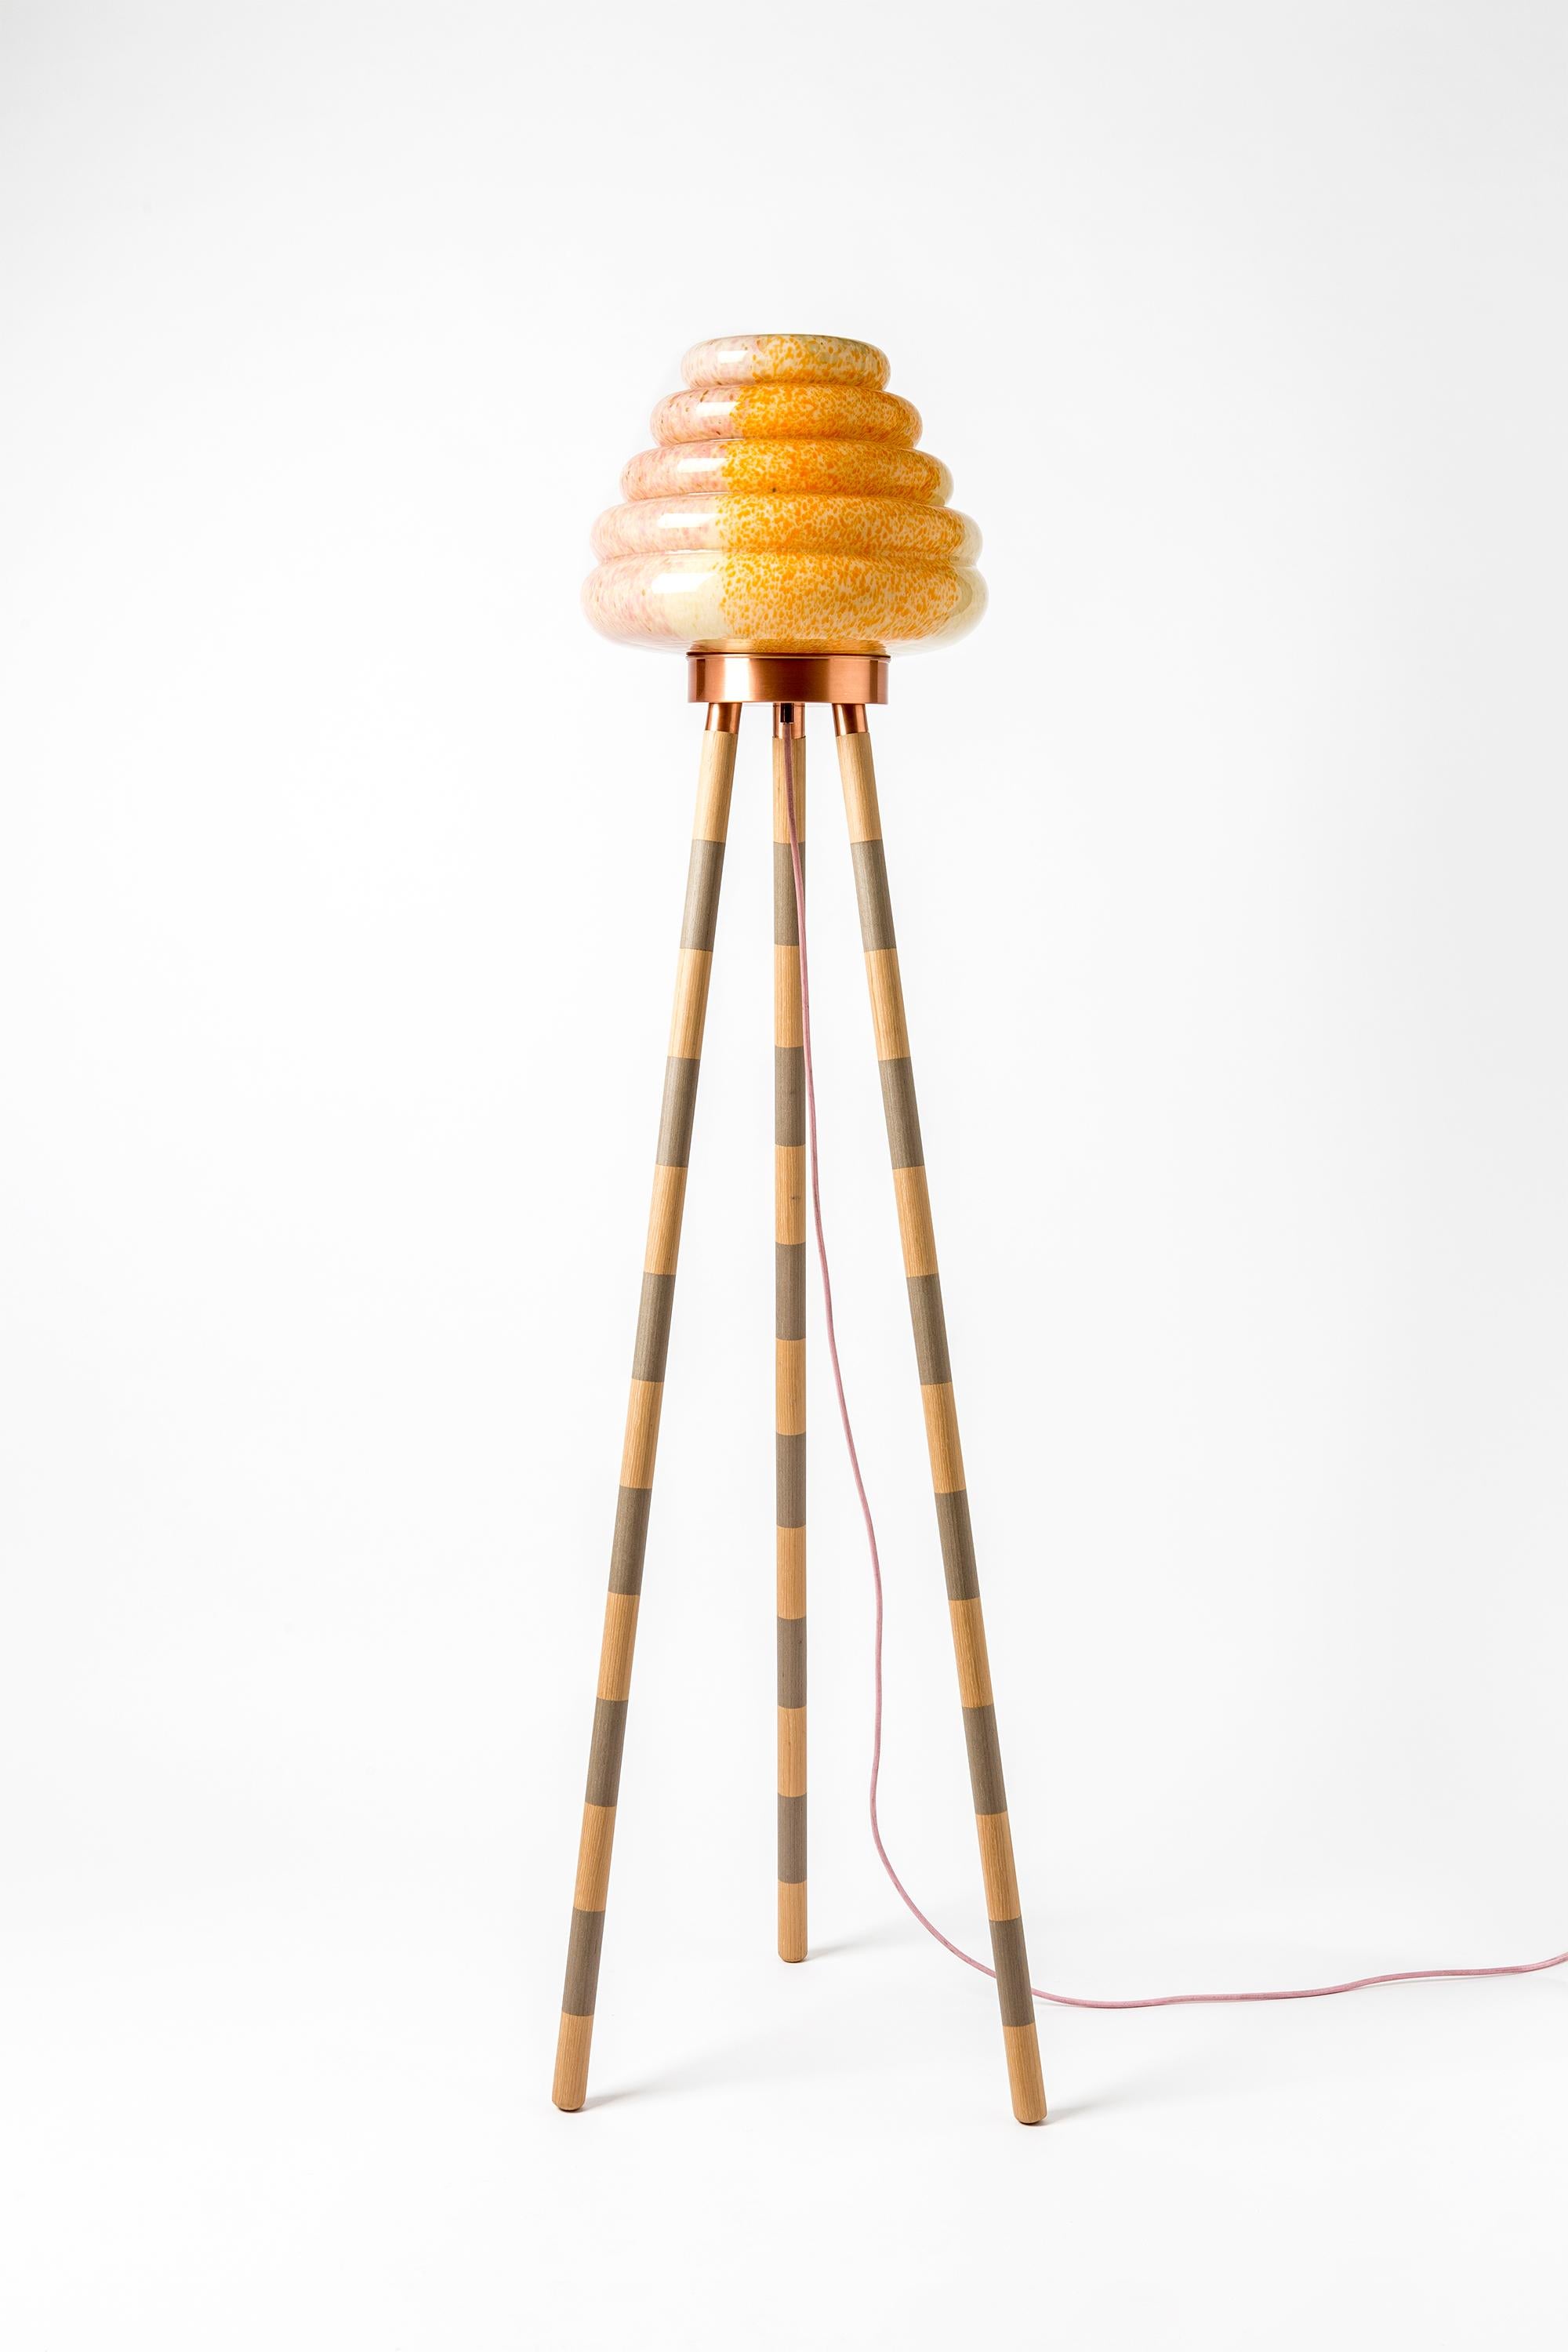 This beehive inspired floor lamp comprises a mixed colored handblown glass shade and different combinations of wood veneer legs and copper. The light is adjustable by the dimmer. Each piece is unique and custom-made.